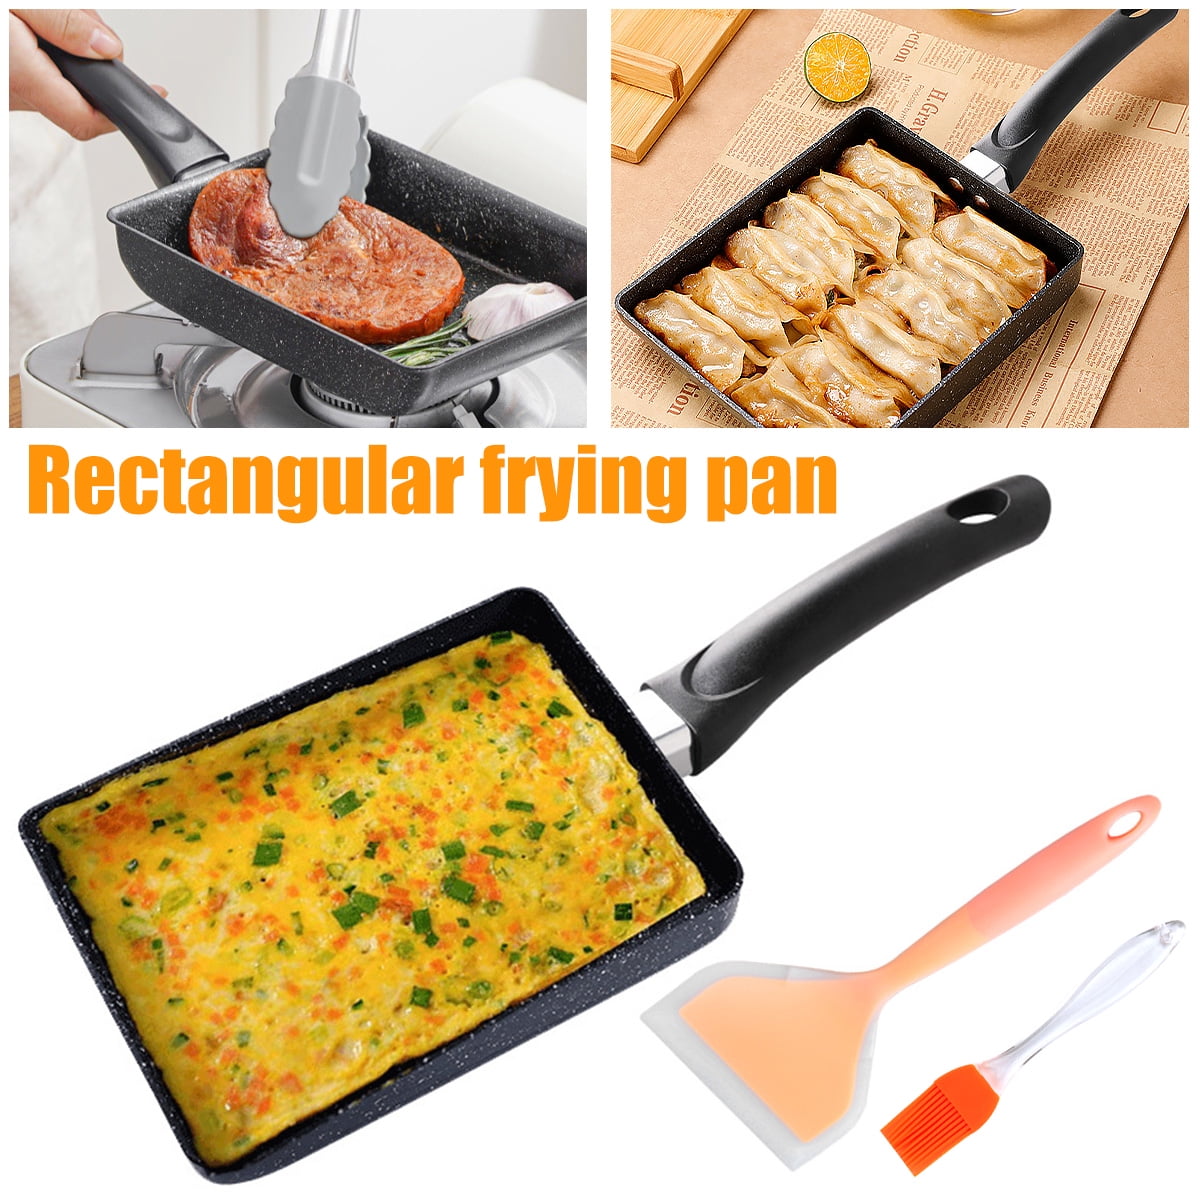 Tamagoyaki Pan, Japanese Cookware, Egg Pan, Rectangle Frying Pan, Kitchen Accessories, Square Pan, Omelette Maker Nonstick, Omelet Pan, Cooking